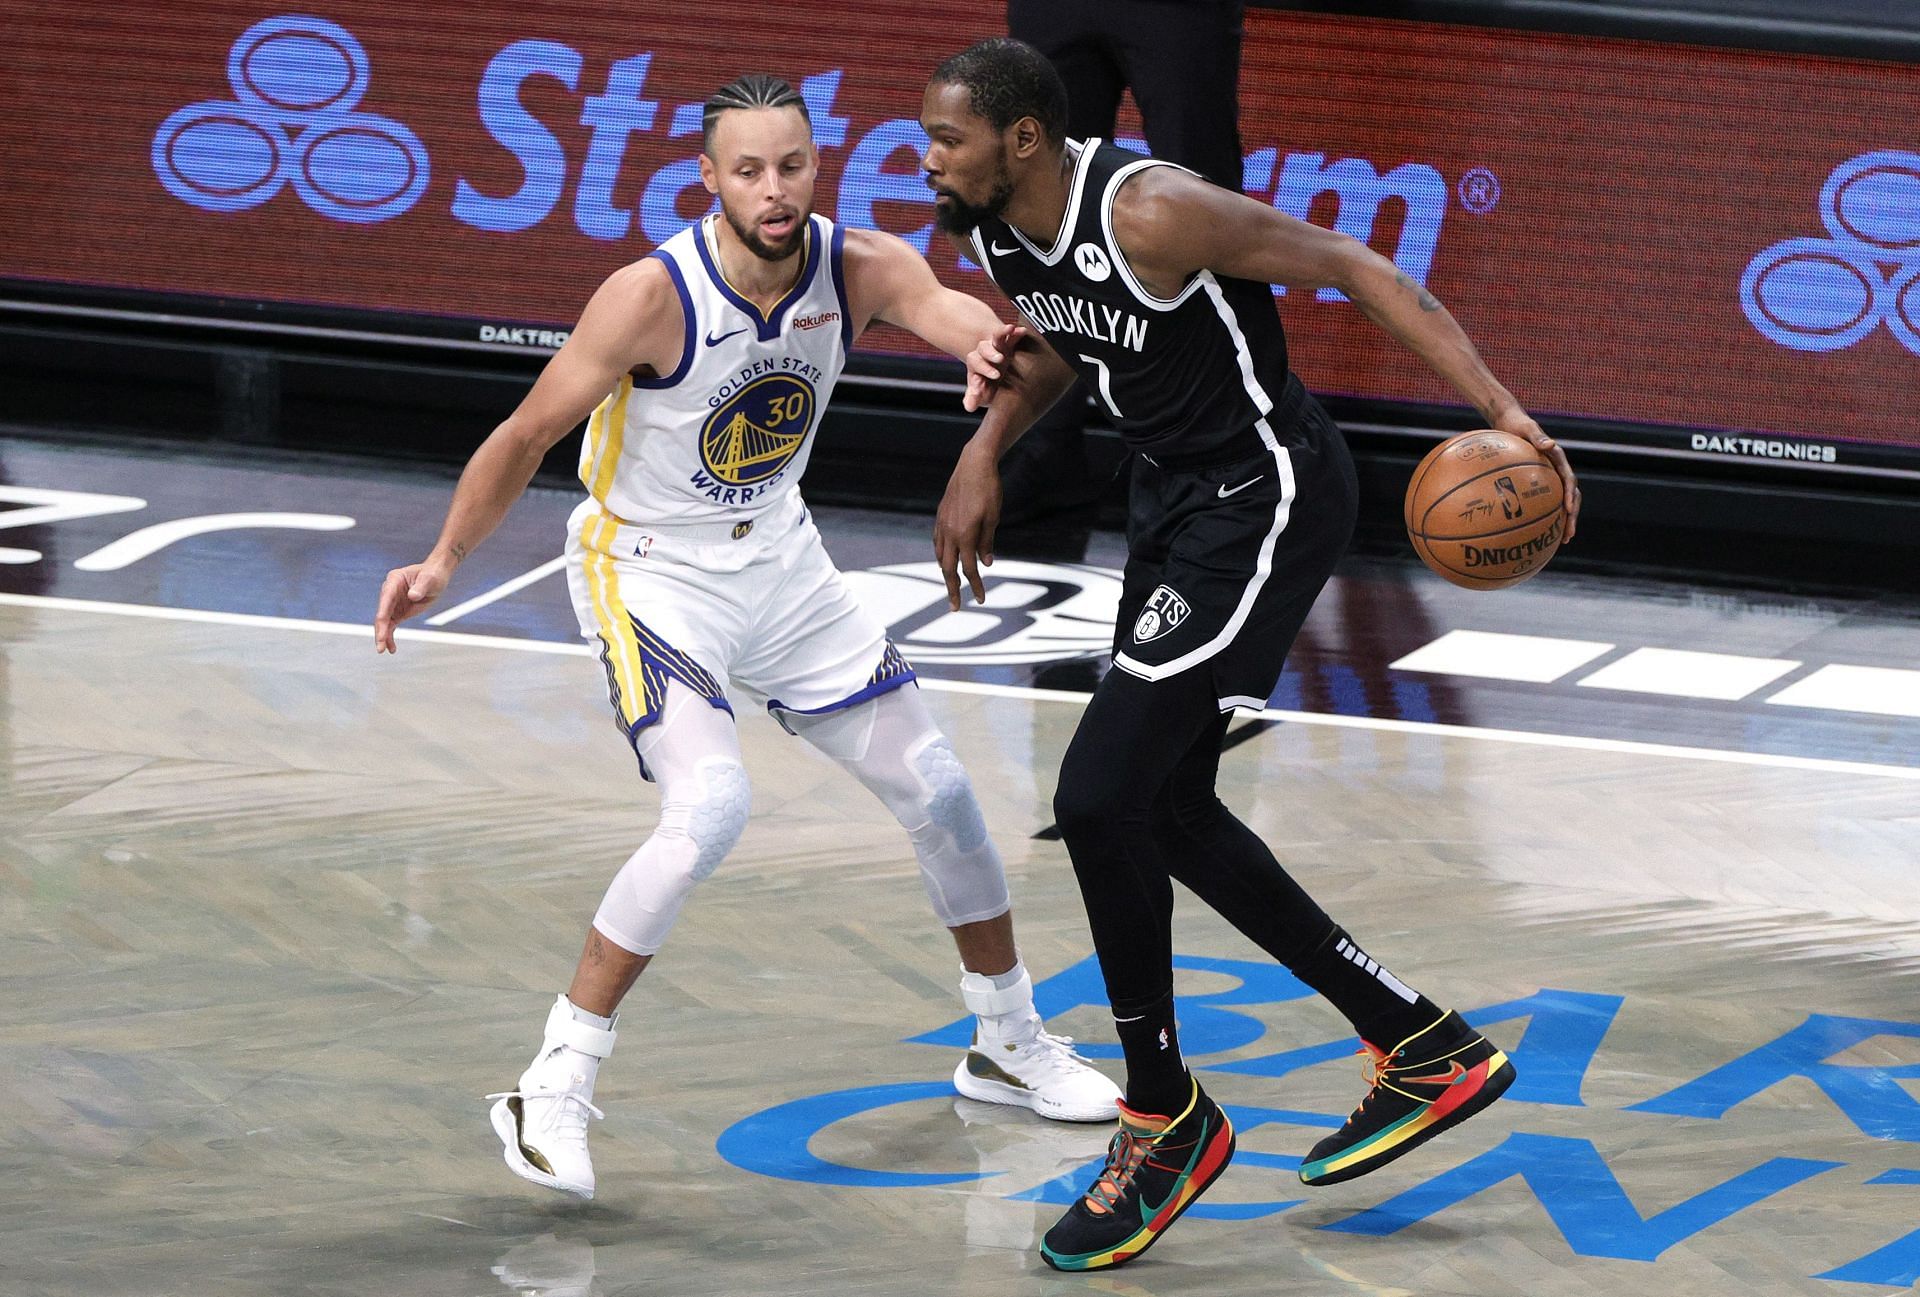 Steph Curry of the Golden State Warriors and Kevin Durant of the Brooklyn Nets